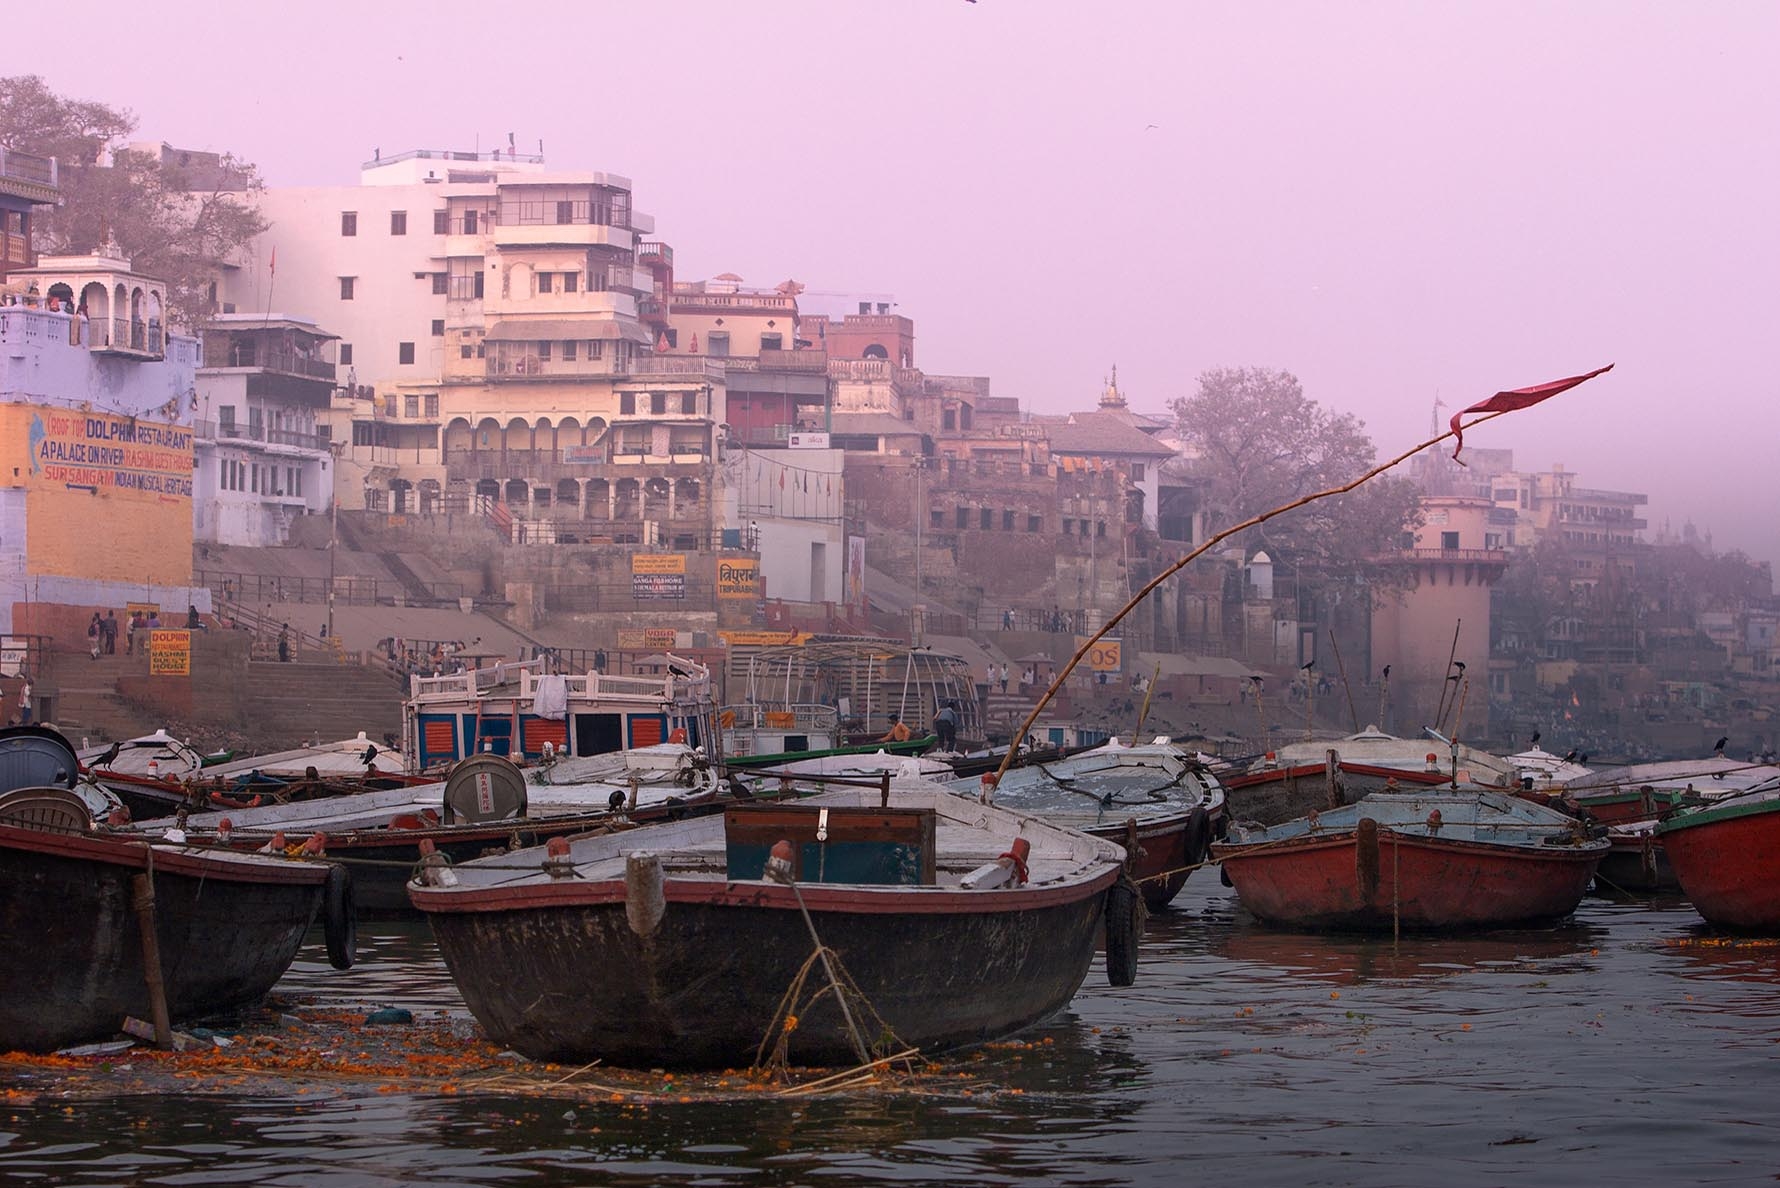 River Ganges and Ghats in Varanasi